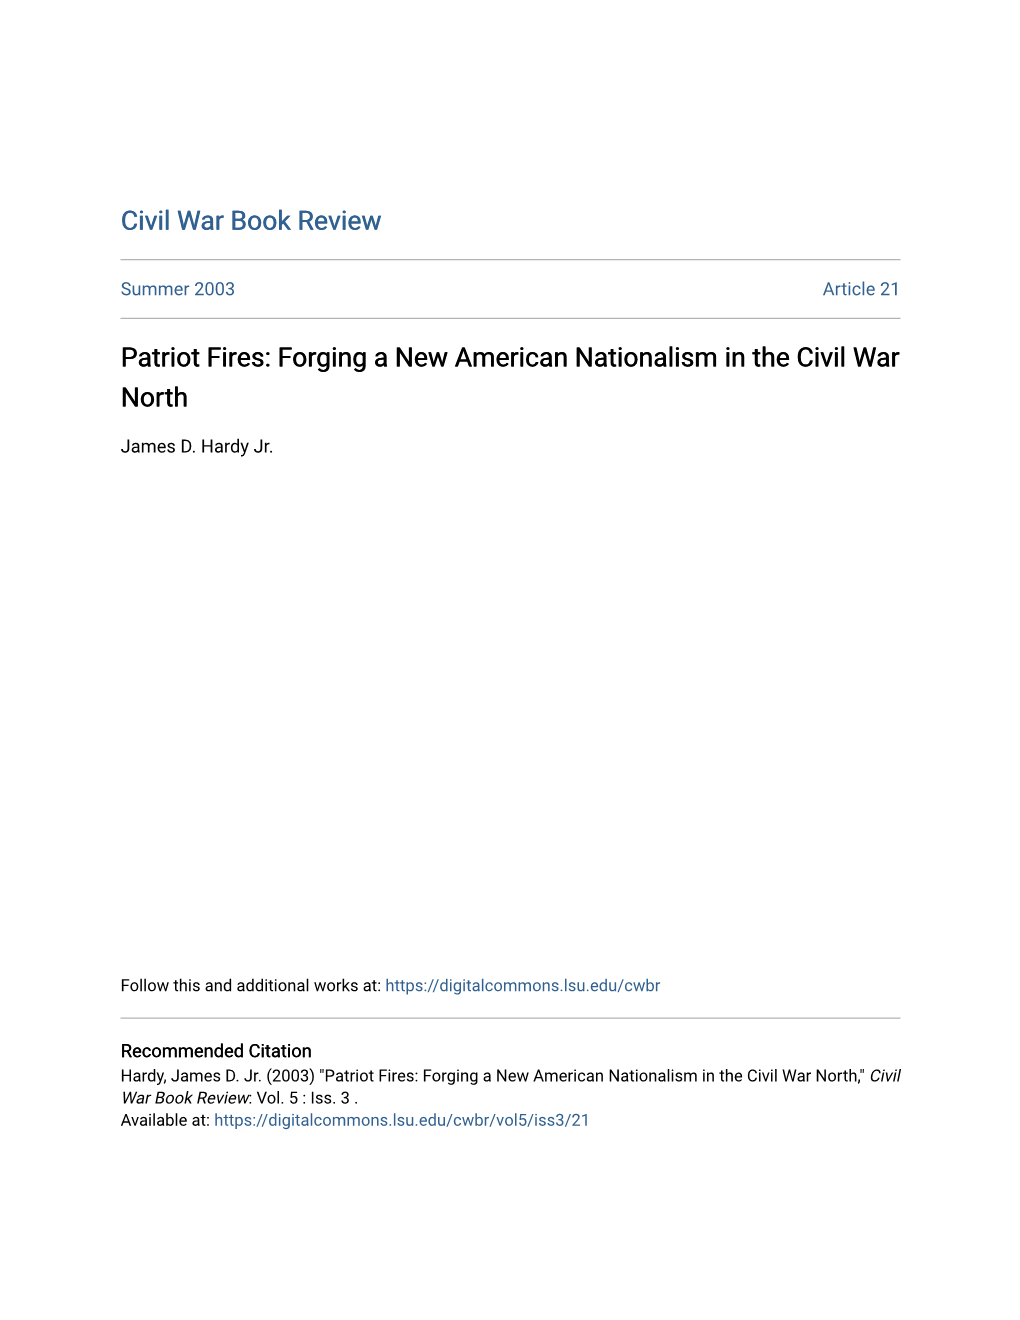 Patriot Fires: Forging a New American Nationalism in the Civil War North